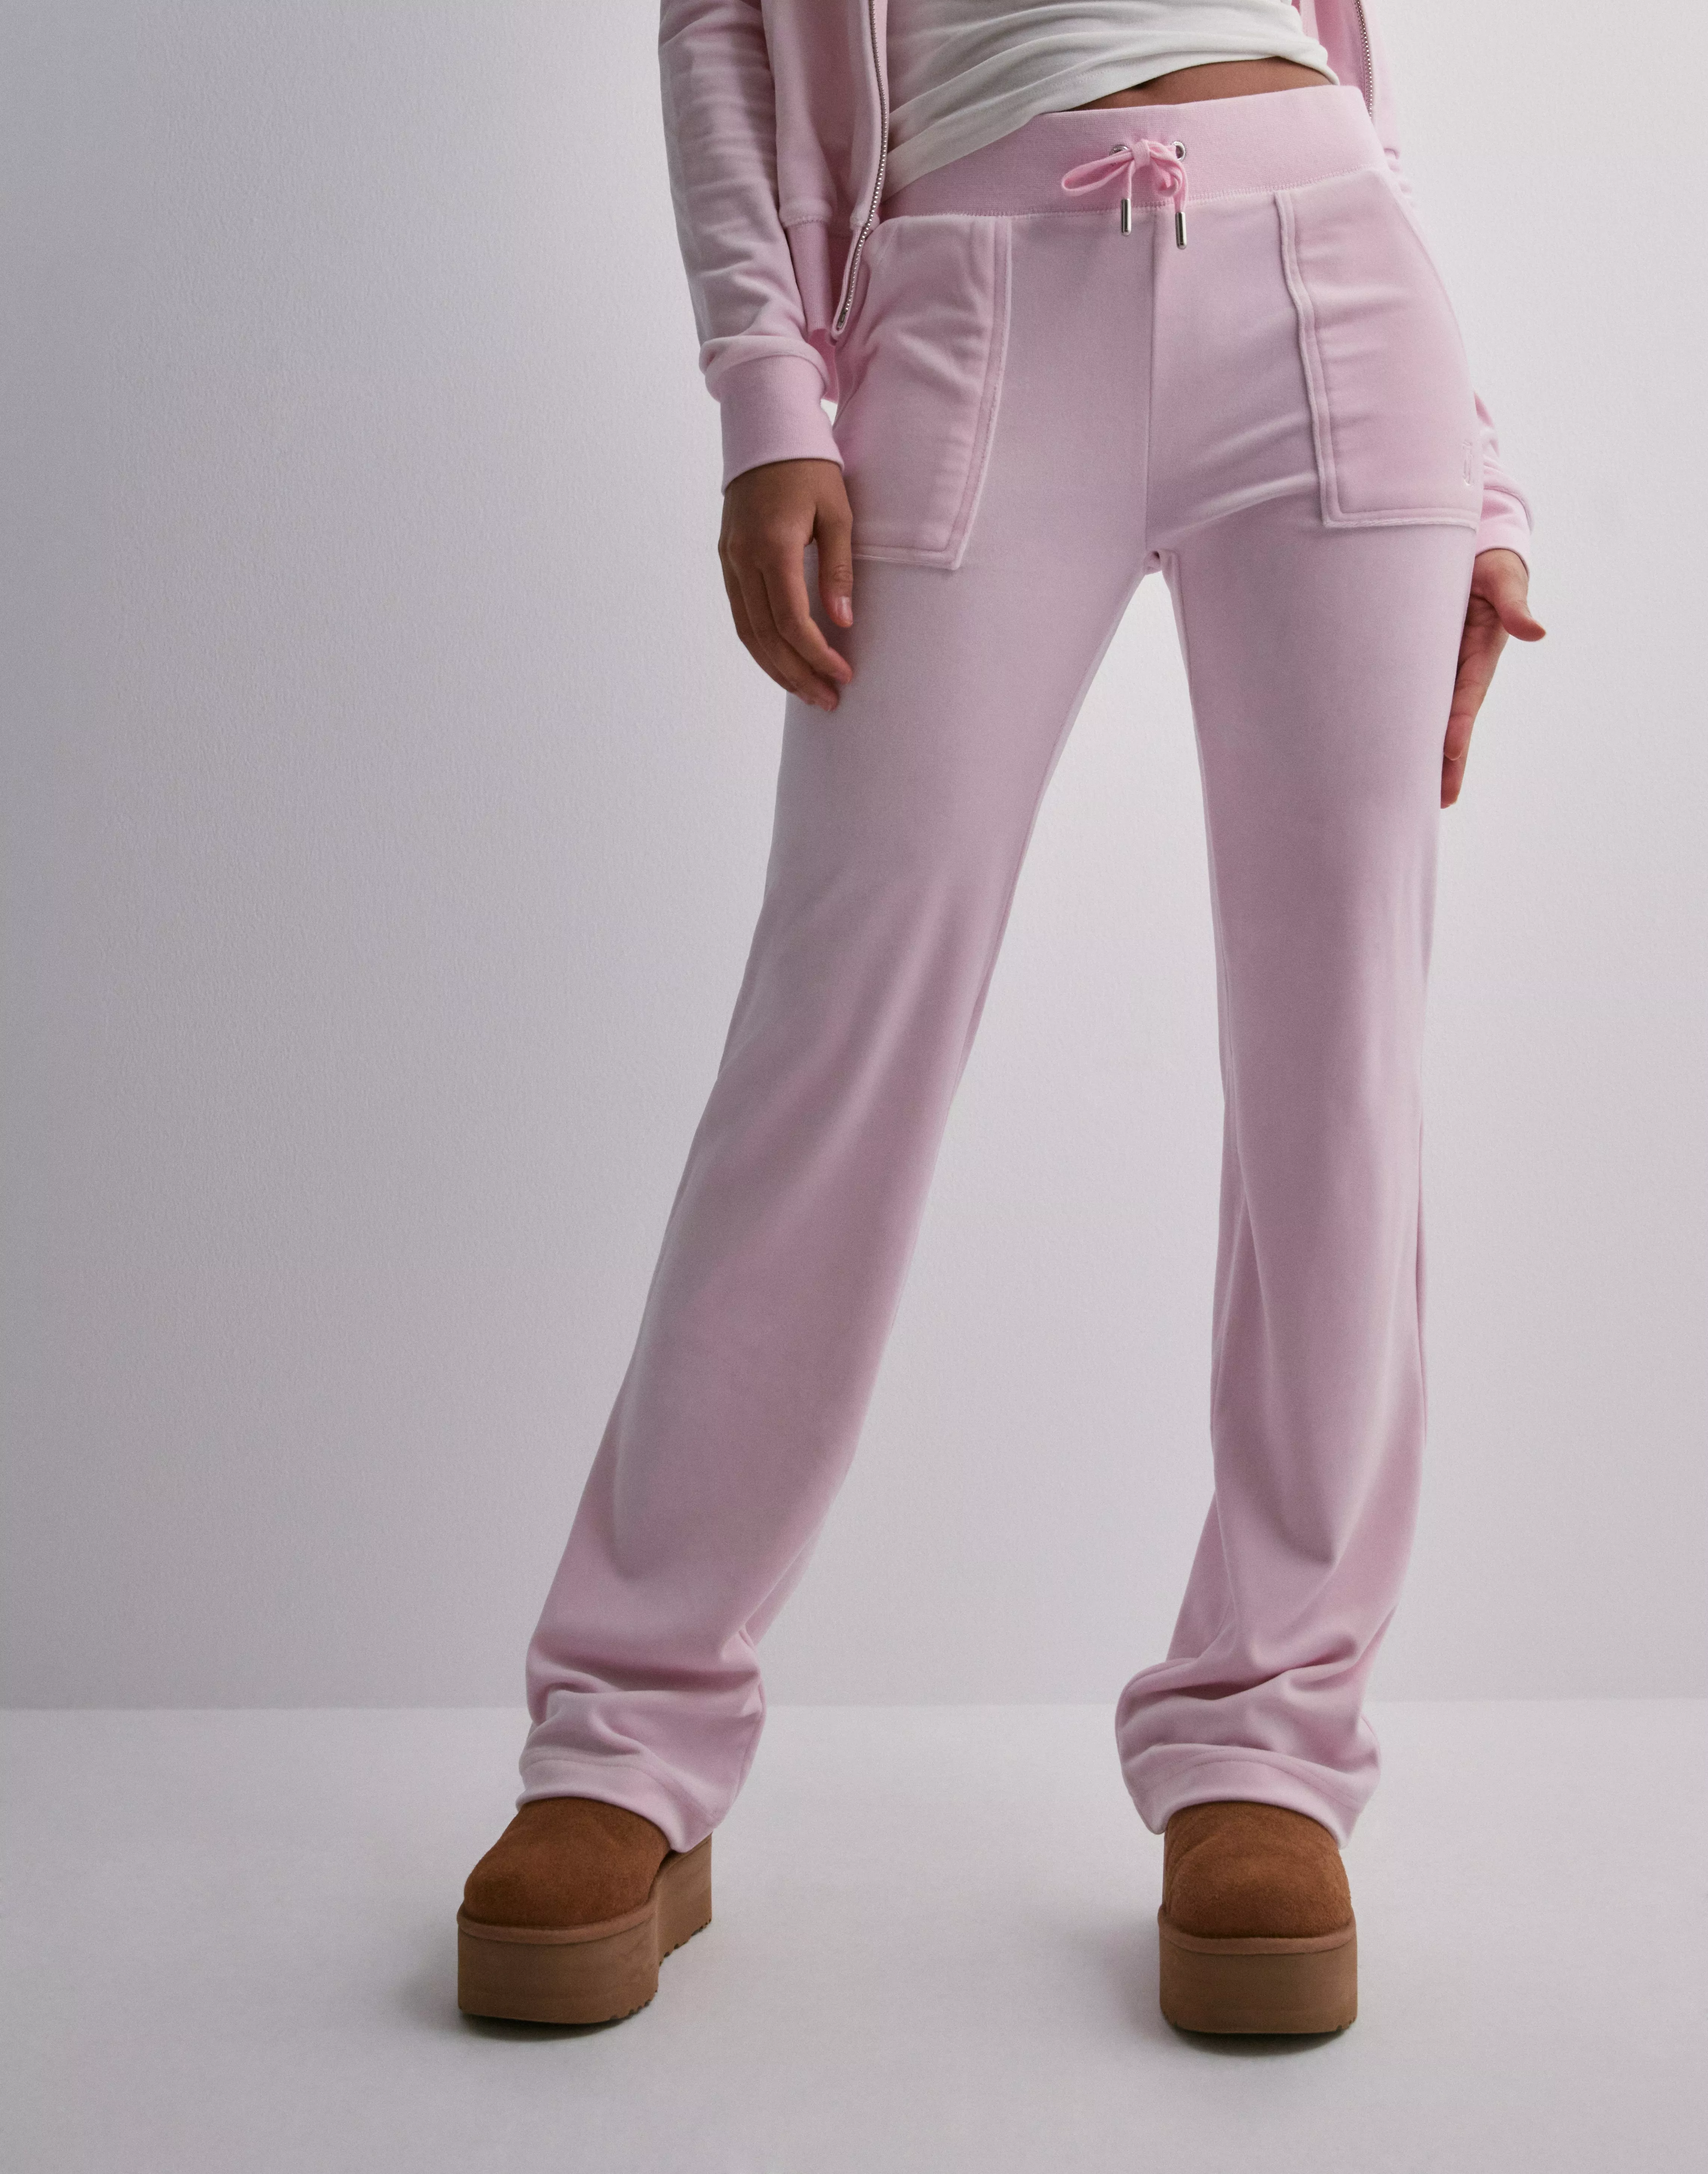 Juicy Couture Wmns Del Ray Classic Velour Pant Pocket Design Women begonia  pink